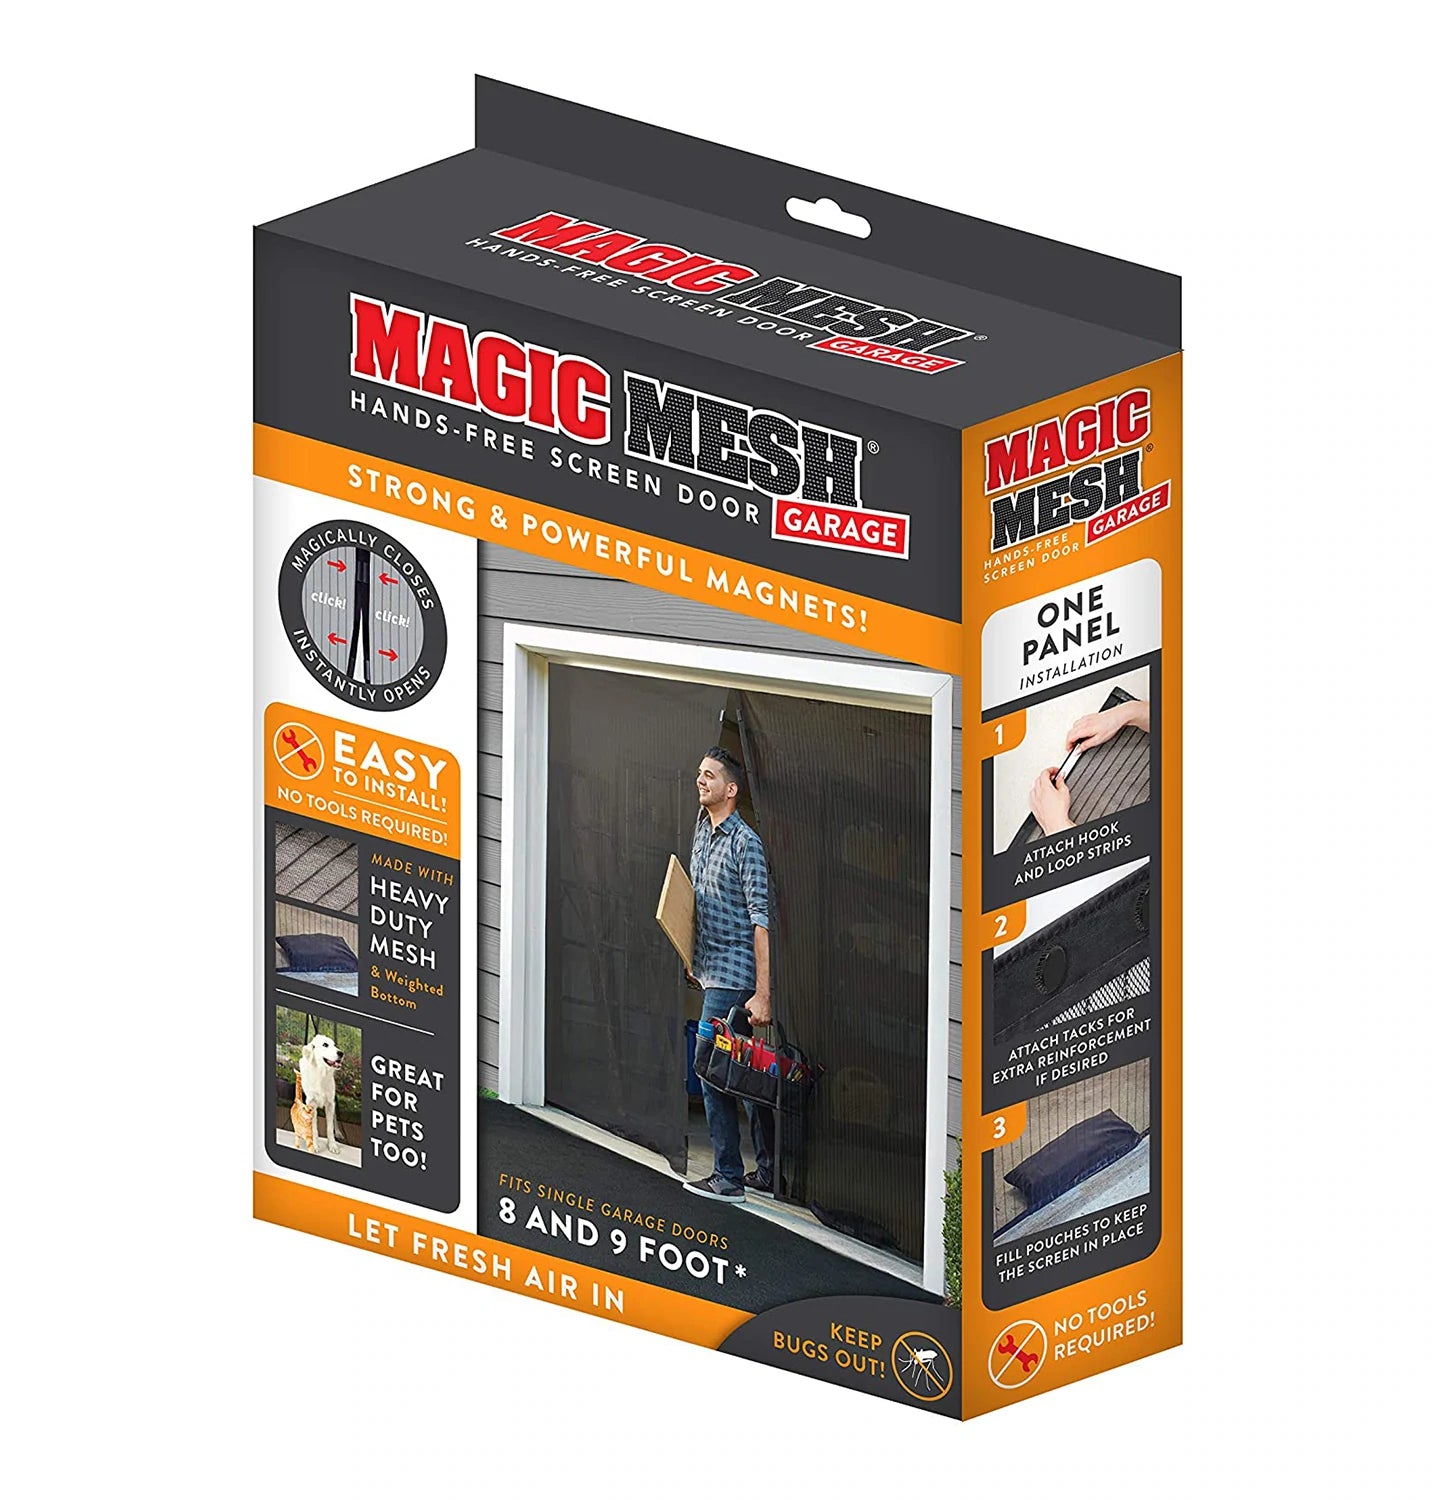 Use Magic Mesh To Screen-in A Porch - Brian's Home Repairs